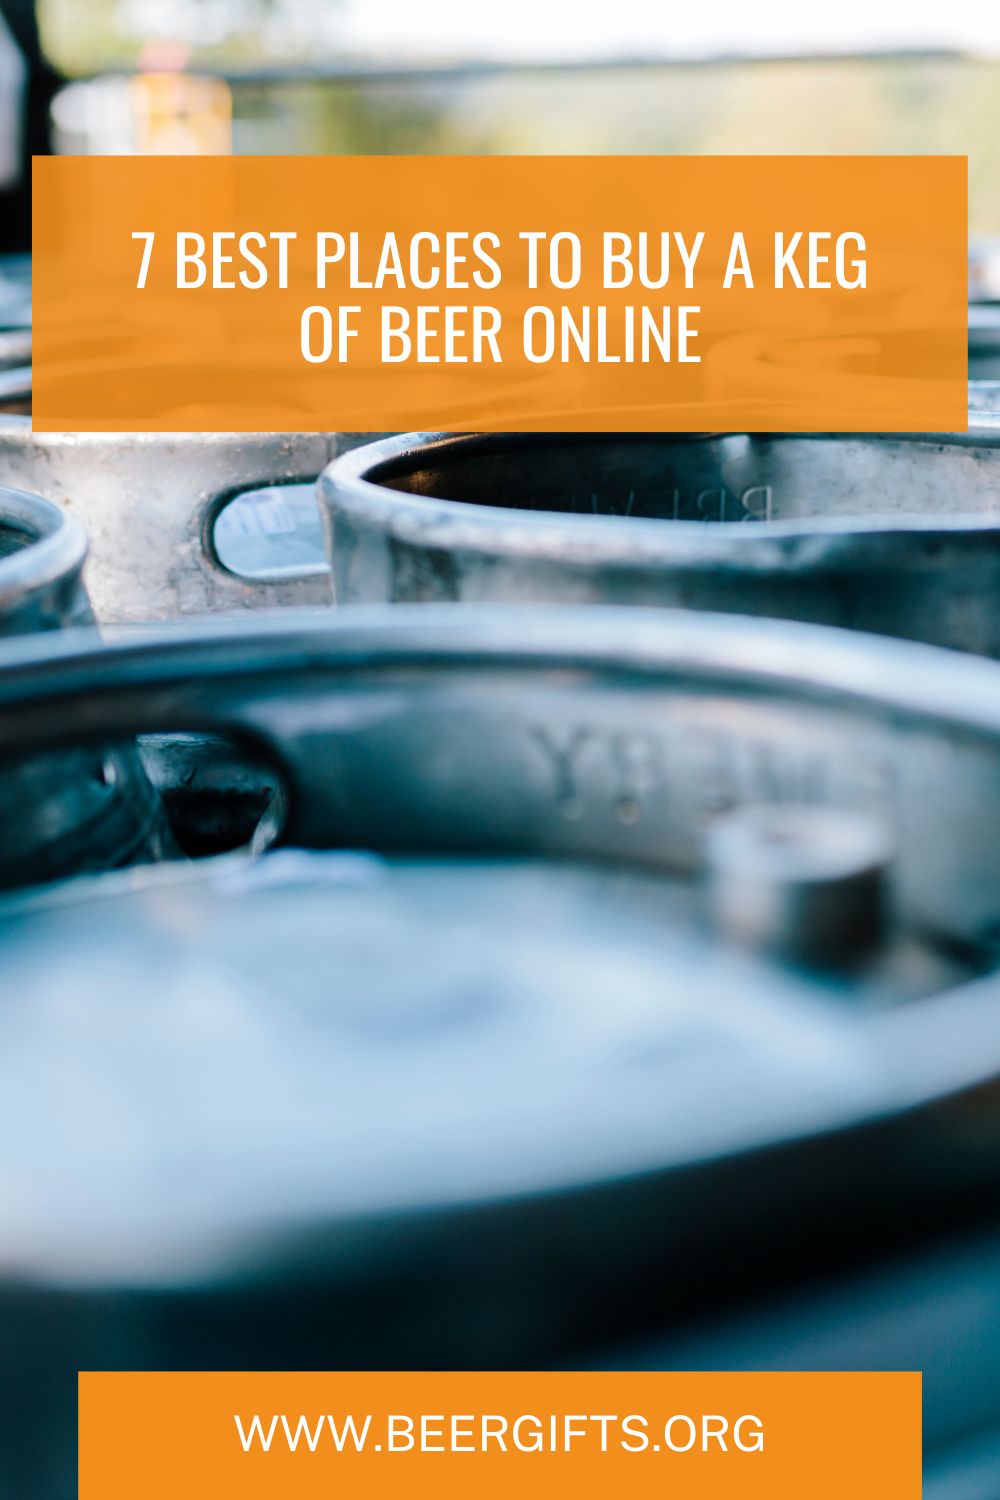 7 Best Places to Buy a Keg of Beer Online2